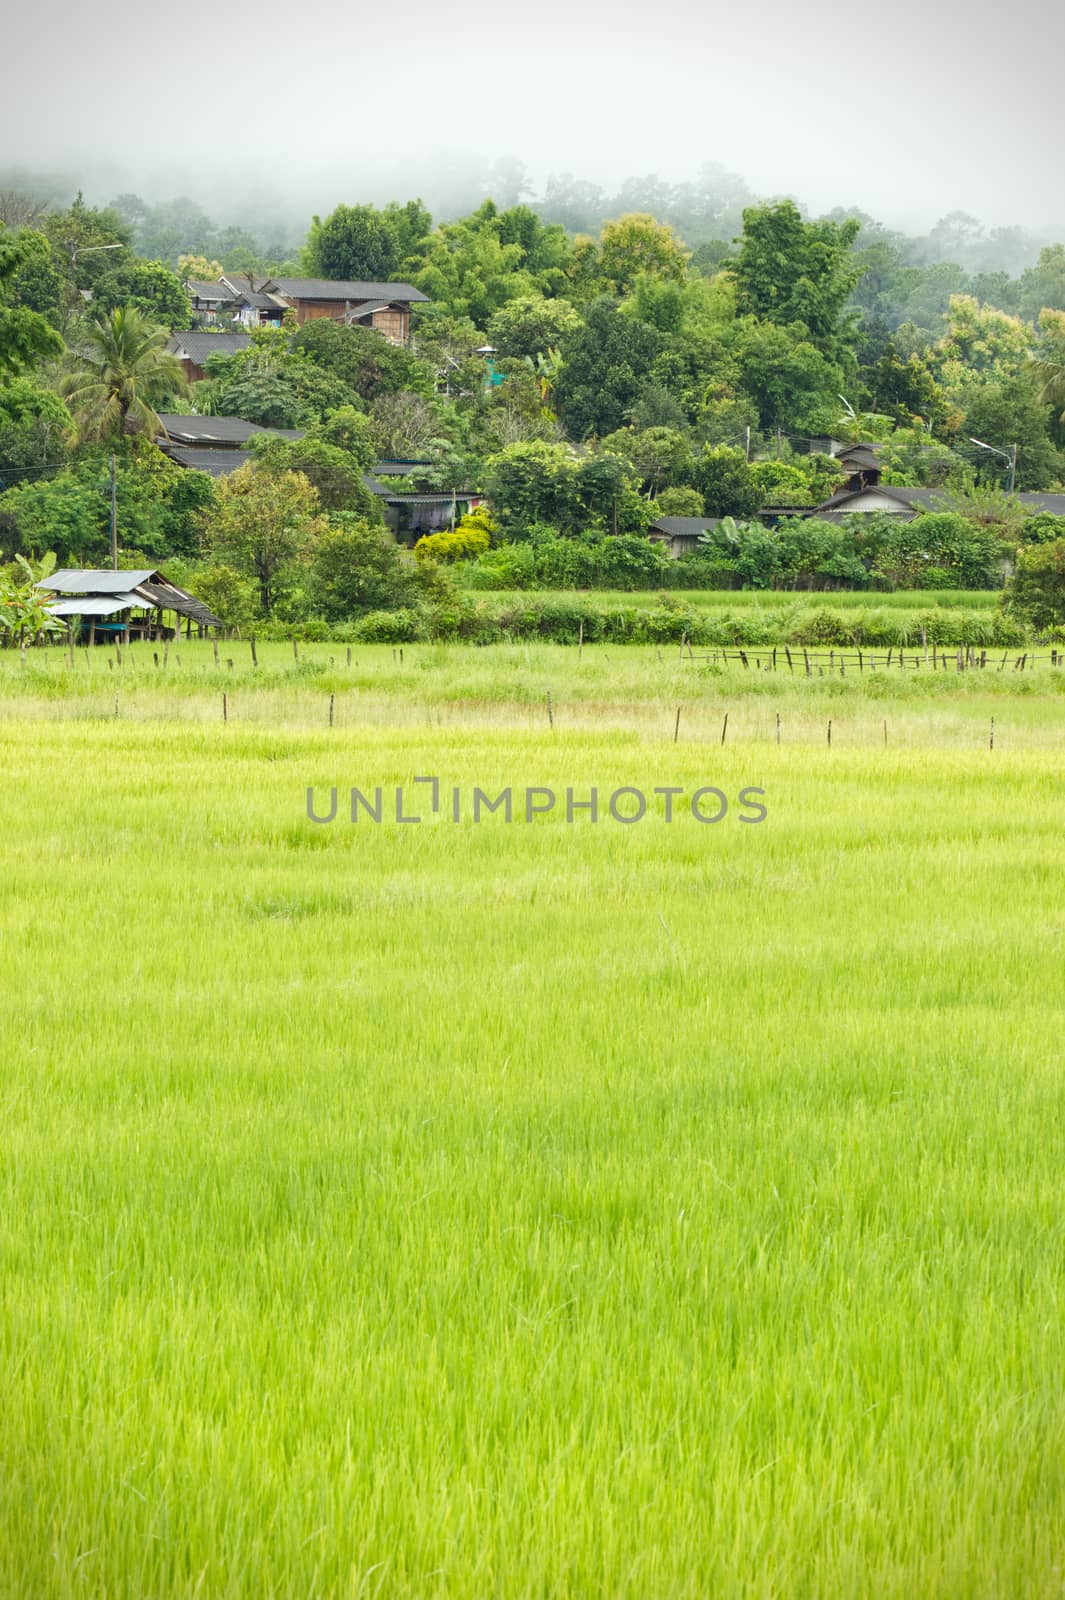 Rural villages of Thailand in the Asian zone and rice fields. by SaitanSainam